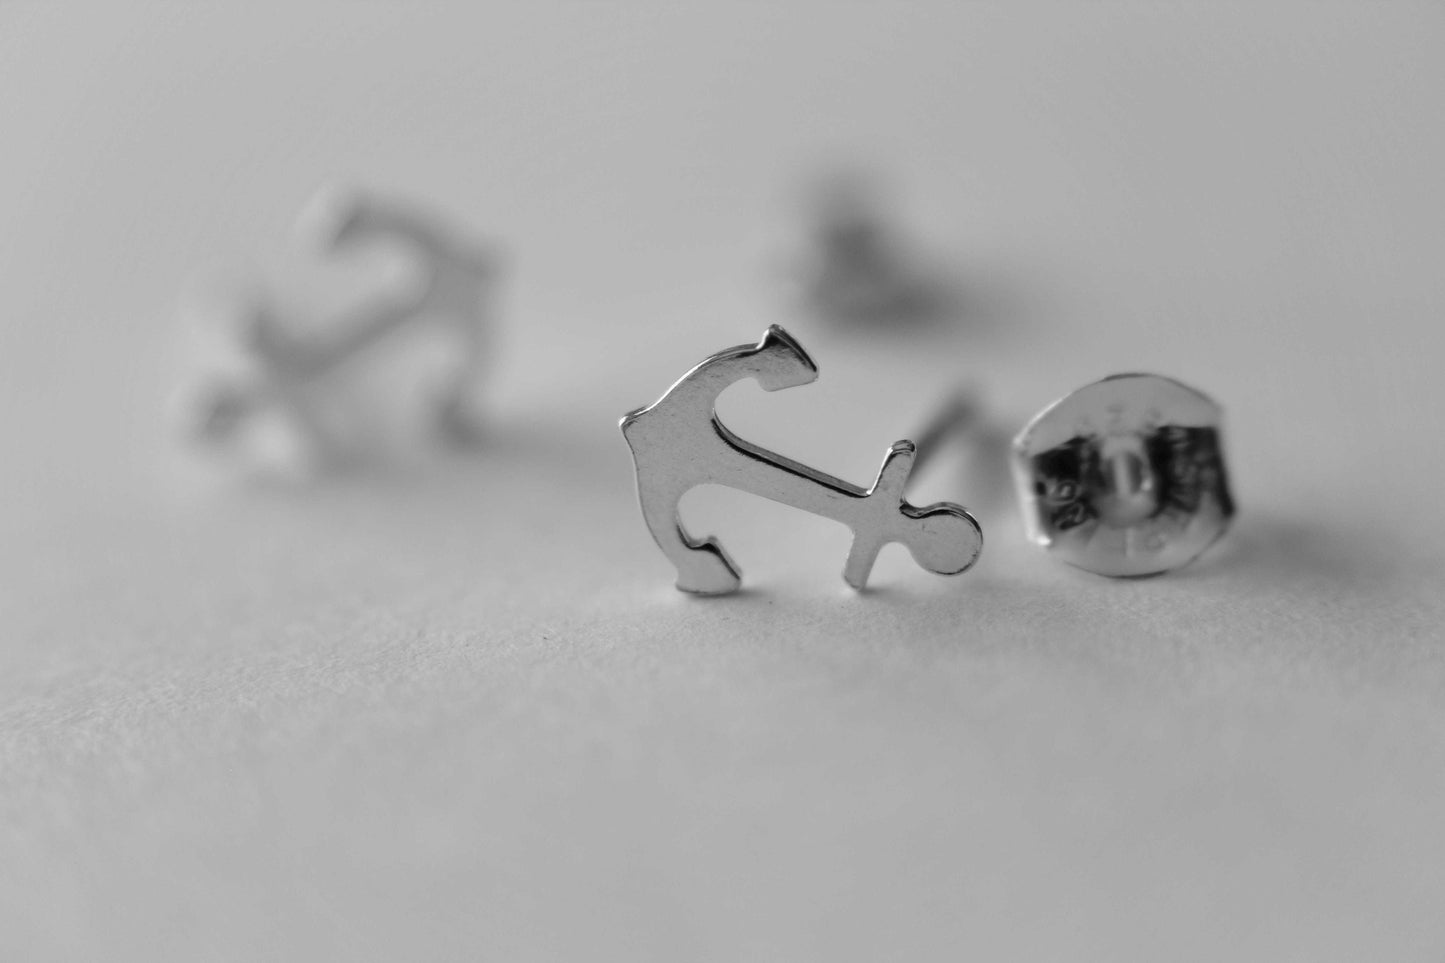 Sterling Silver Anchor Earrings, Anchor Stud Earrings, Tiny Sterling Silver Anchor Stud Earrings, Small Anchor Post Earrings, Tiny Anchor